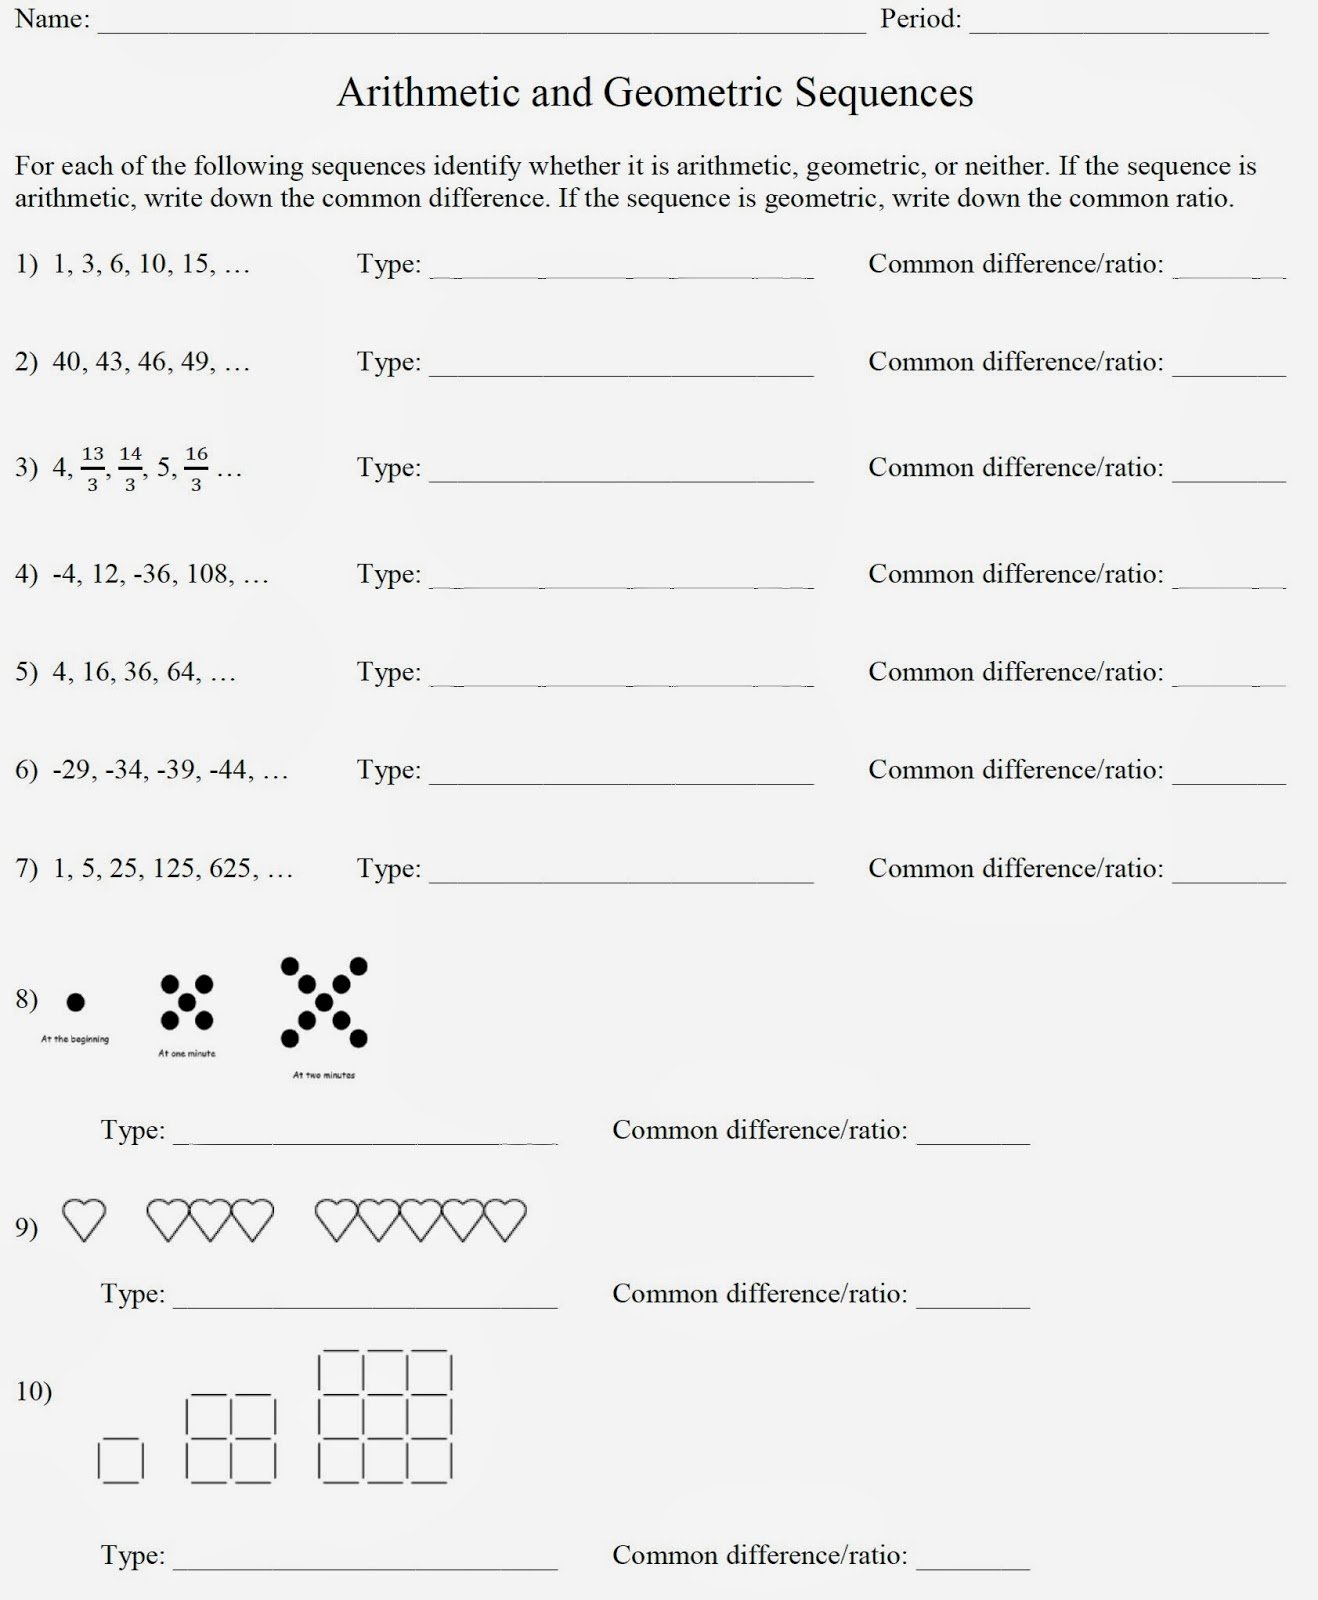 Arithmetic Sequences Worksheet Answers Lovely Mr Matt S Math Classes assignment Arithmetic and